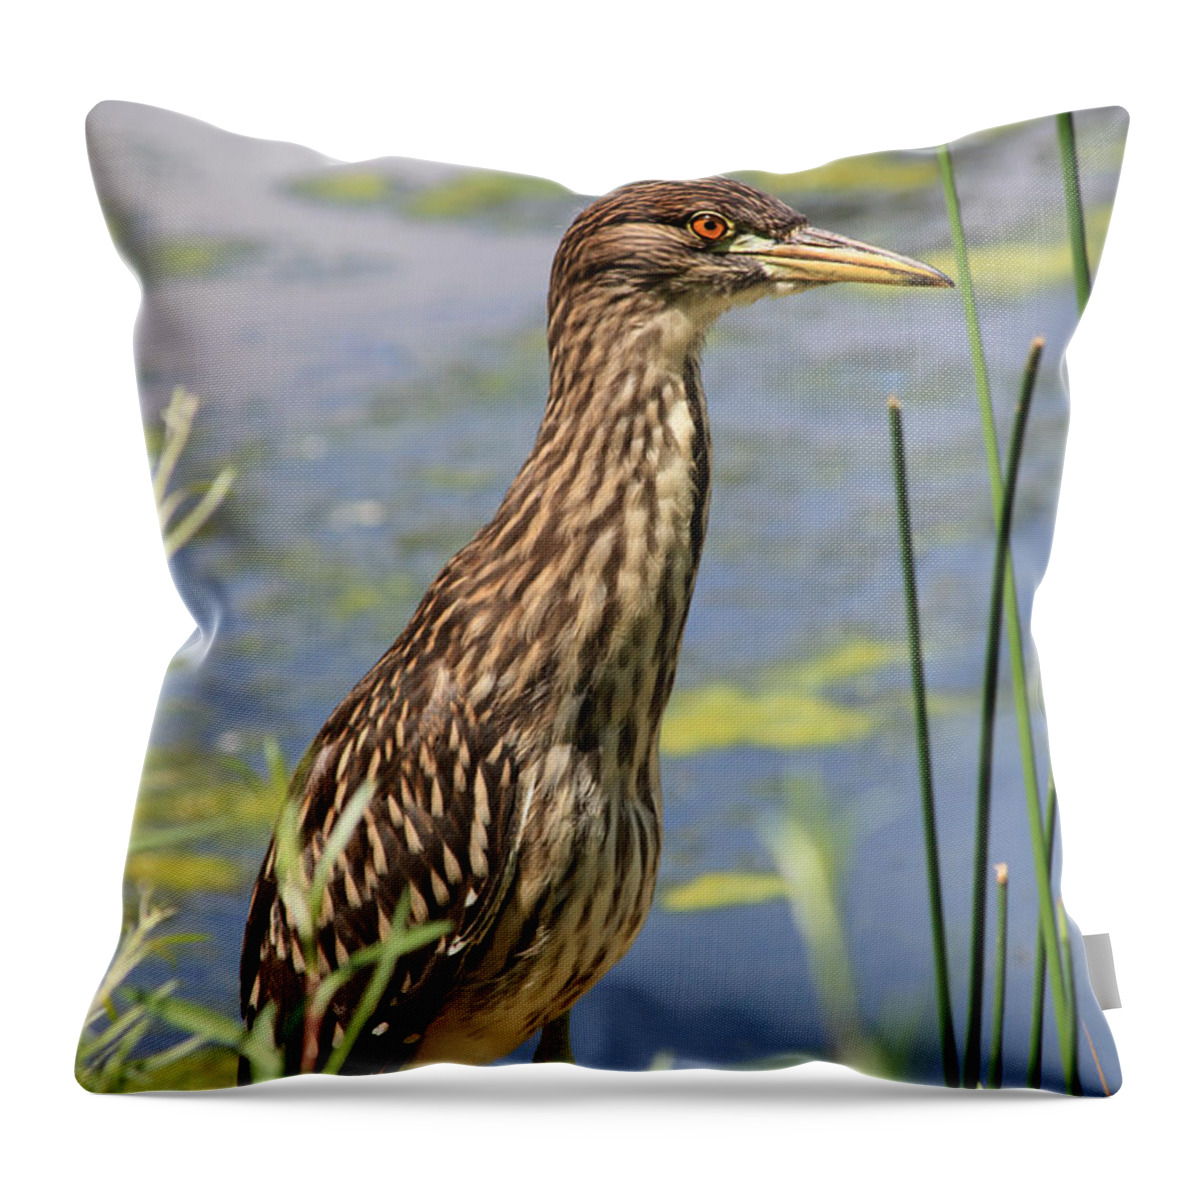 Black Crowned Night Heron Throw Pillow featuring the photograph Young Heron by Shane Bechler